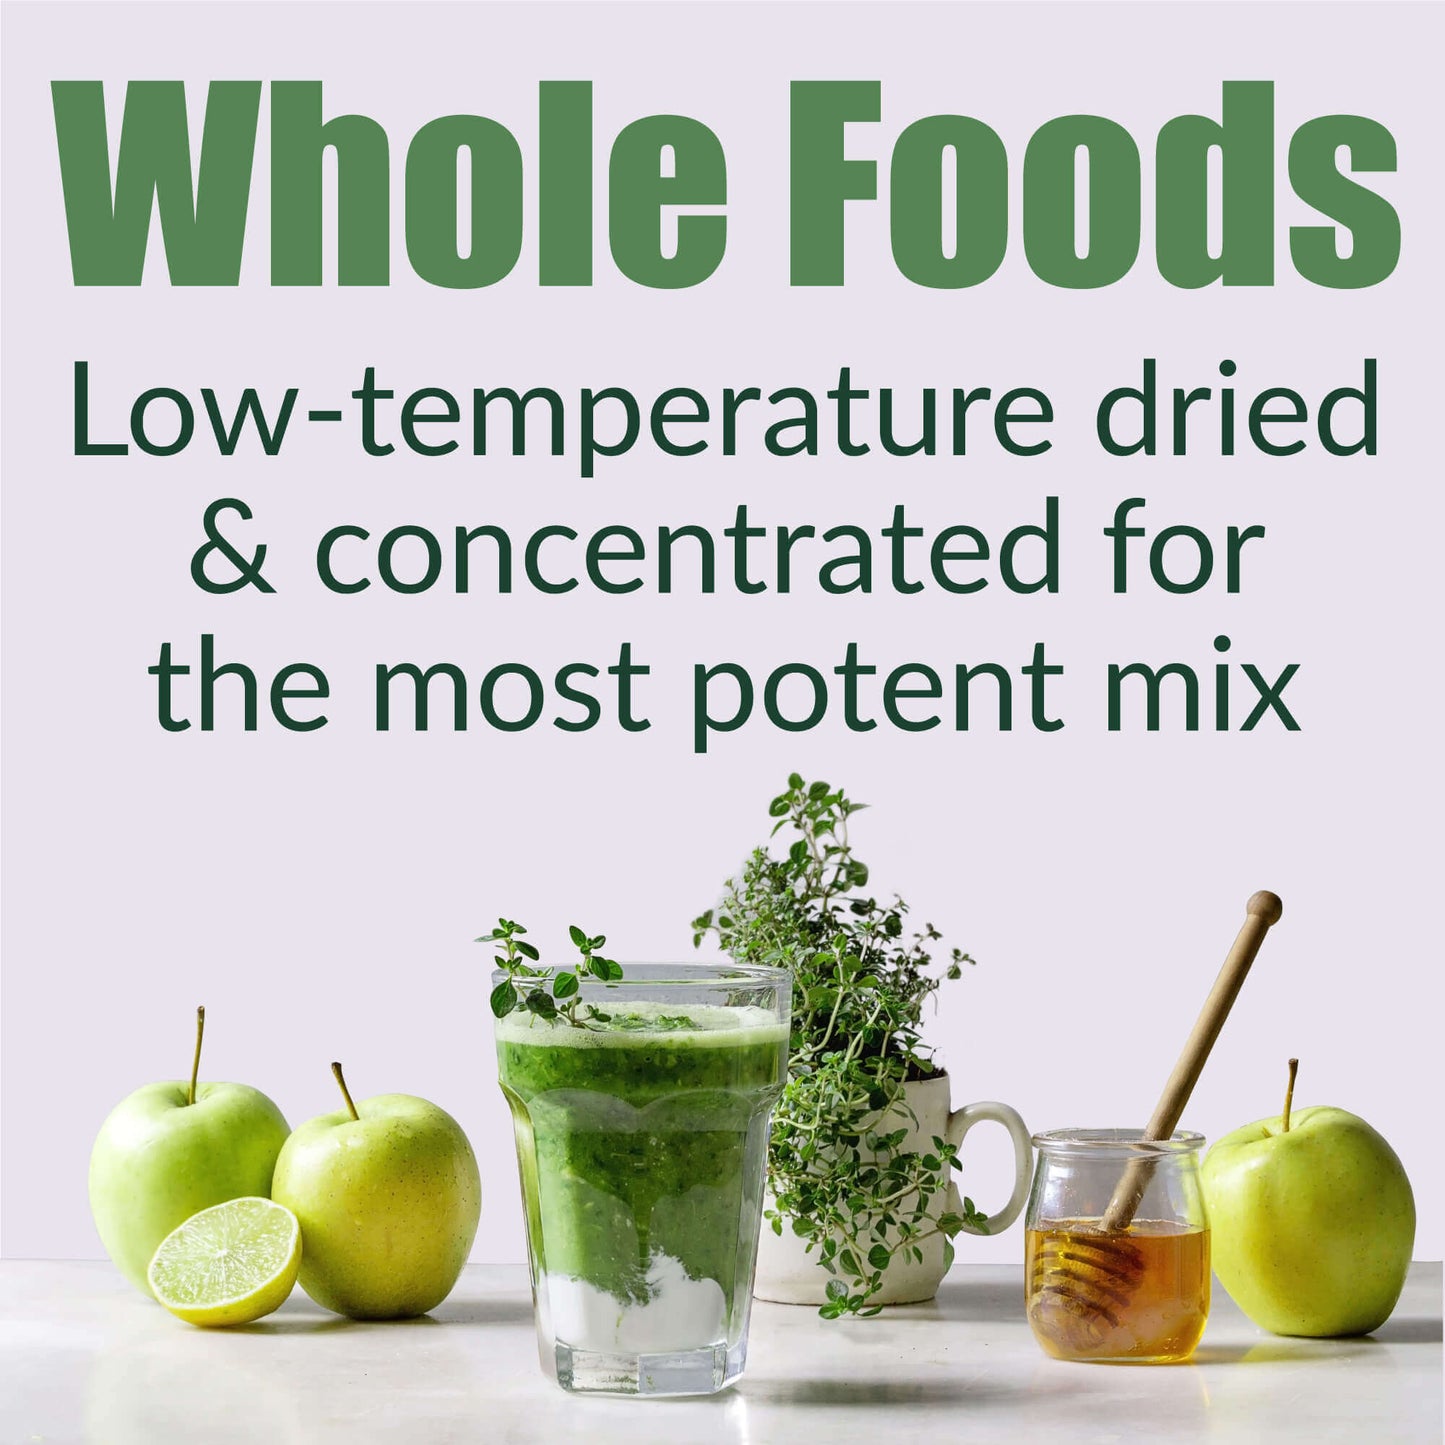 Raw Super Greens Daily Juice Drink With Prebiotic, Probiotic & Digestive Enzymes by Wild Foods